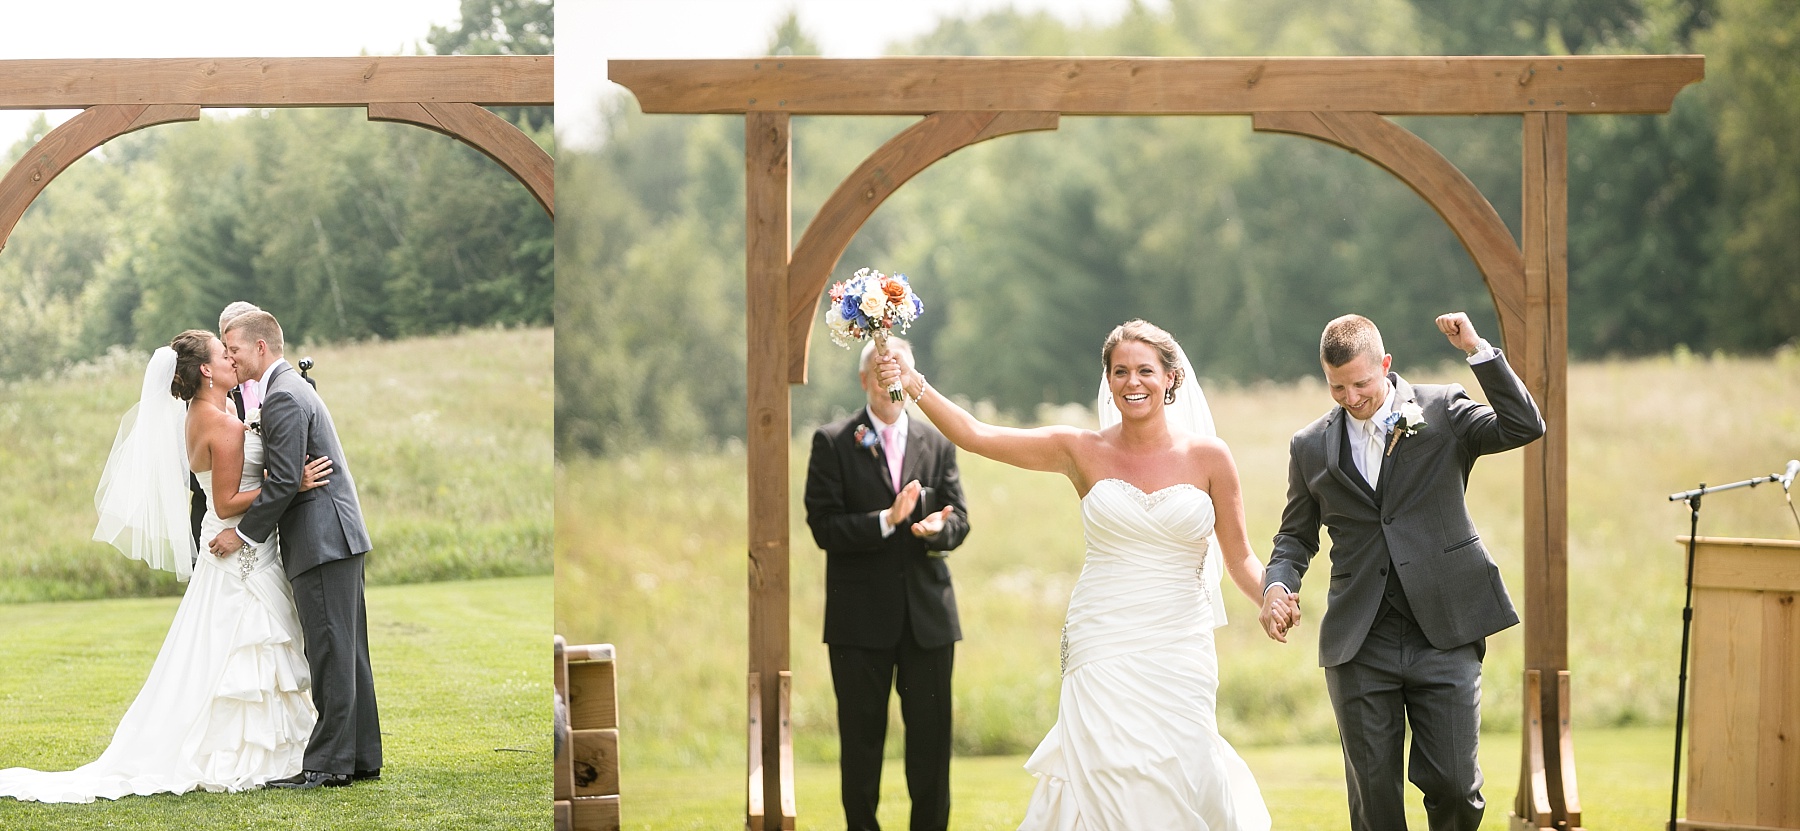 Marie & Austin were married on a hot August Saturday at The Barn on Stoney Hill in Cadott, WI.